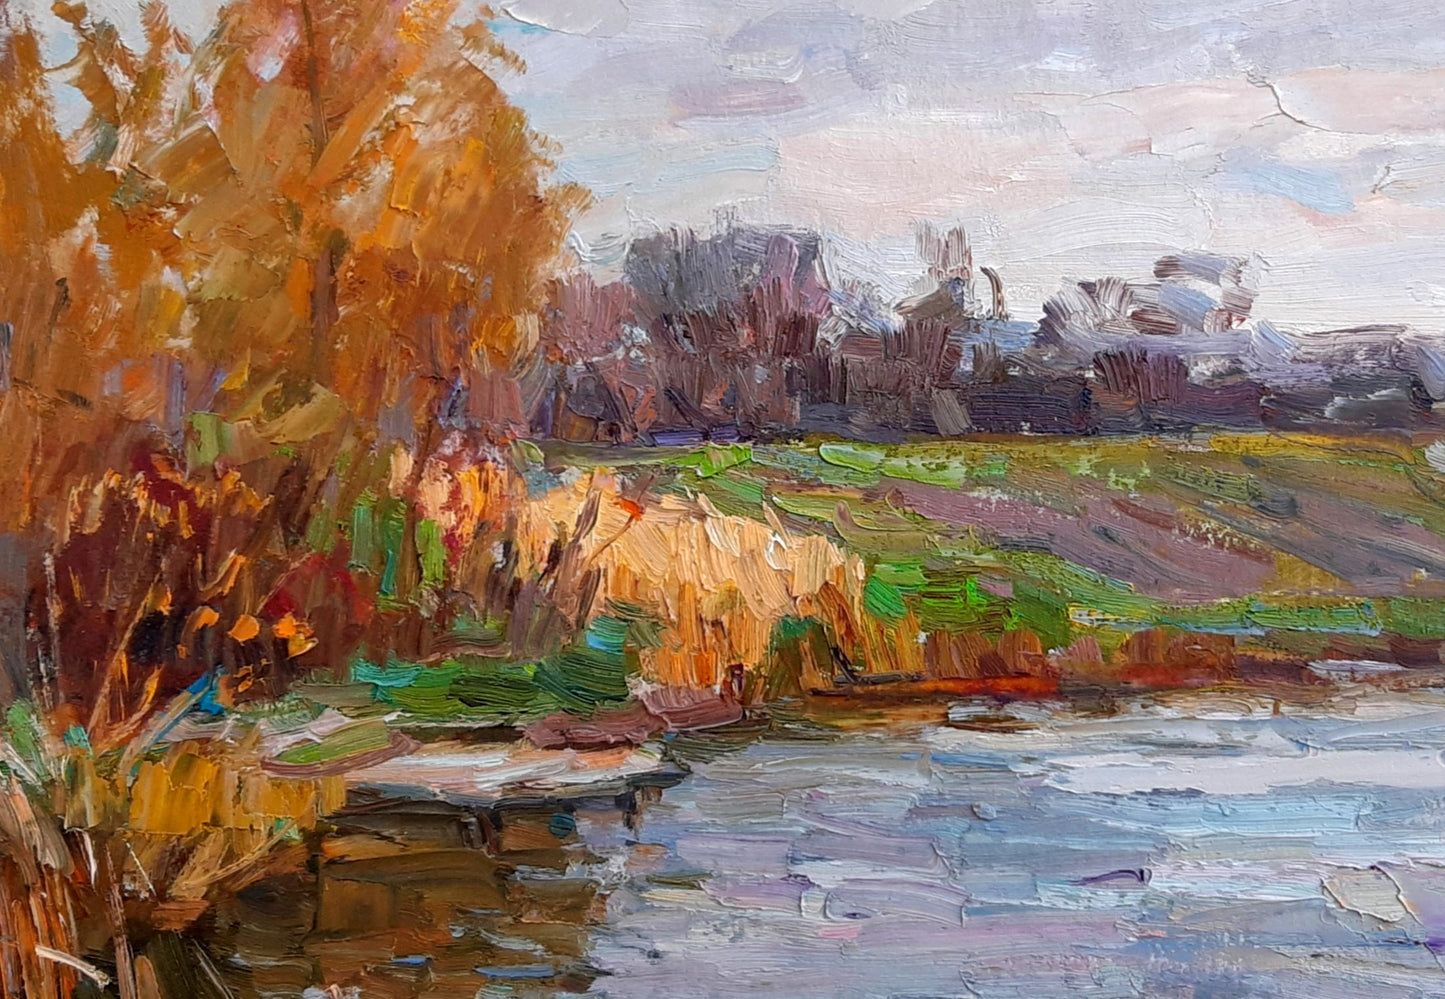 An oil painting named "October Morning" by Vyacheslav Pereta